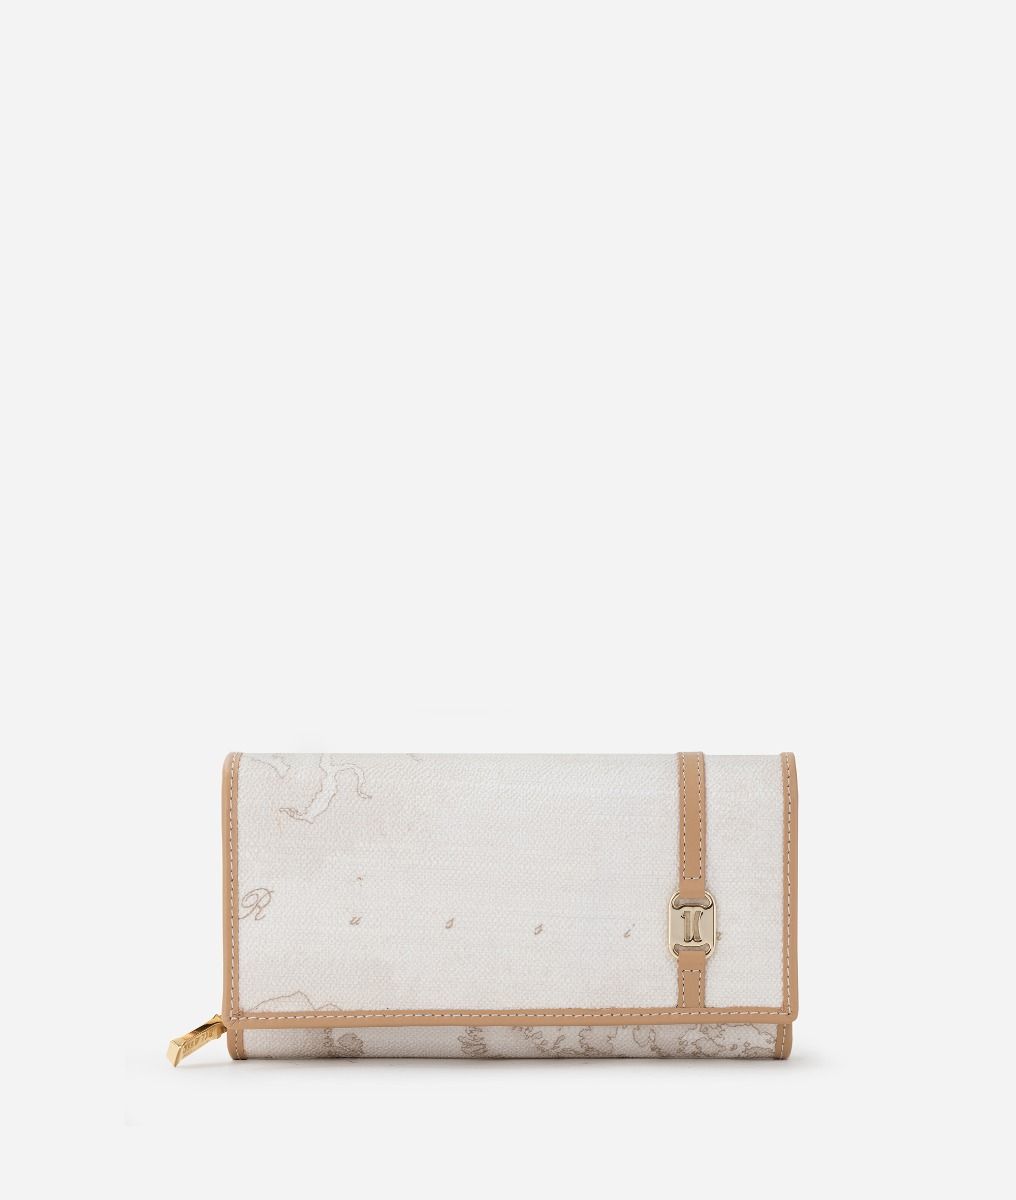 Geo White wallet with front snap,front